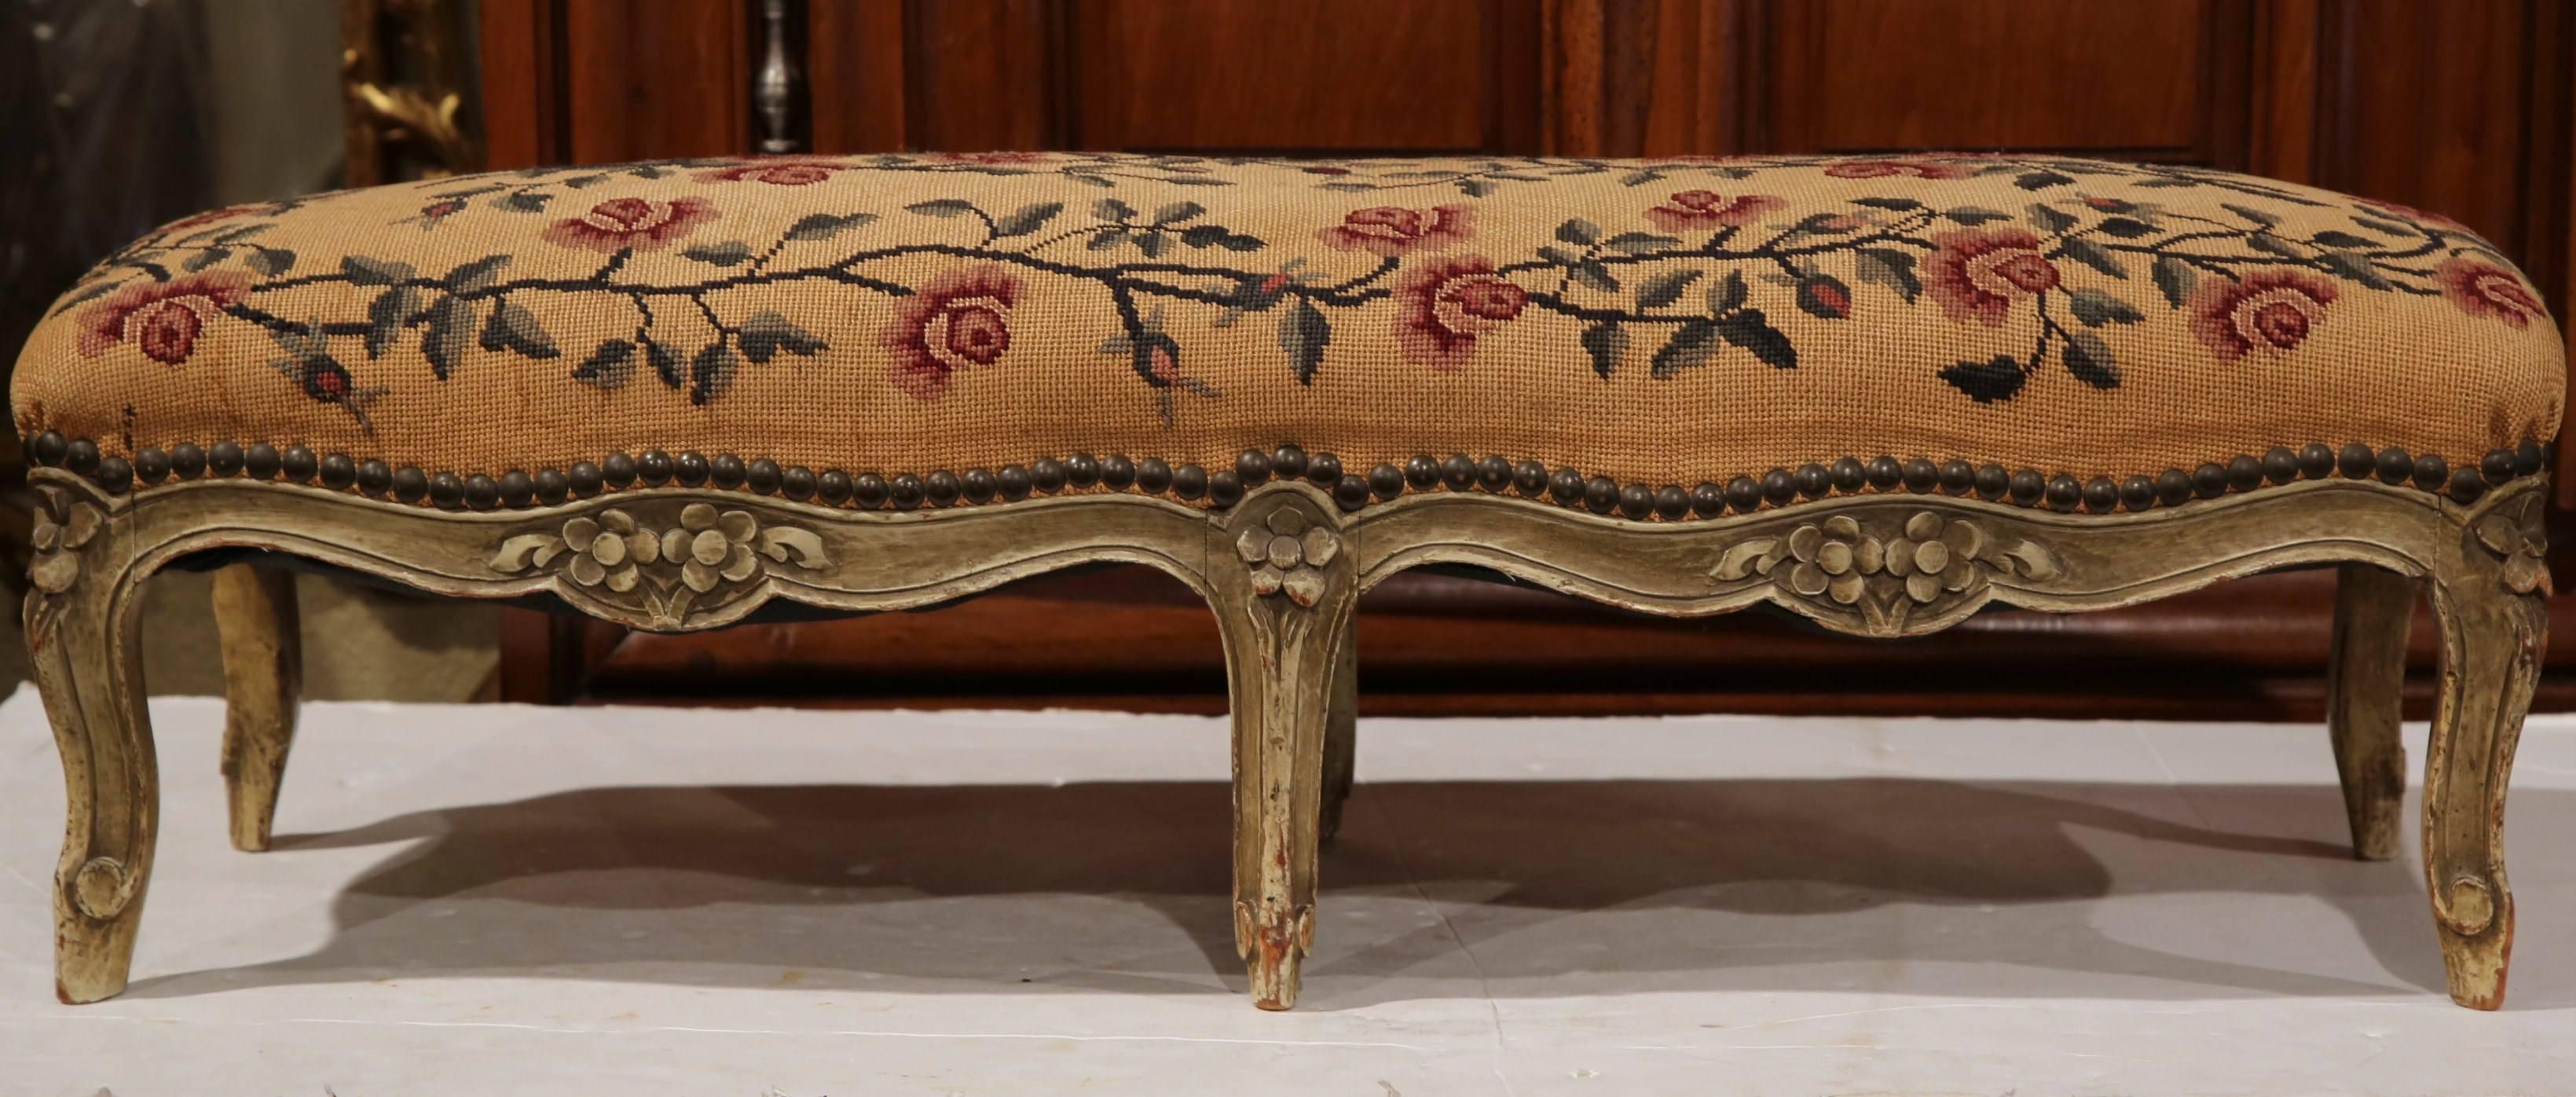 Hand-Carved 19th Century French Louis XV Carved Painted Footstool with Needlepoint Tapestry